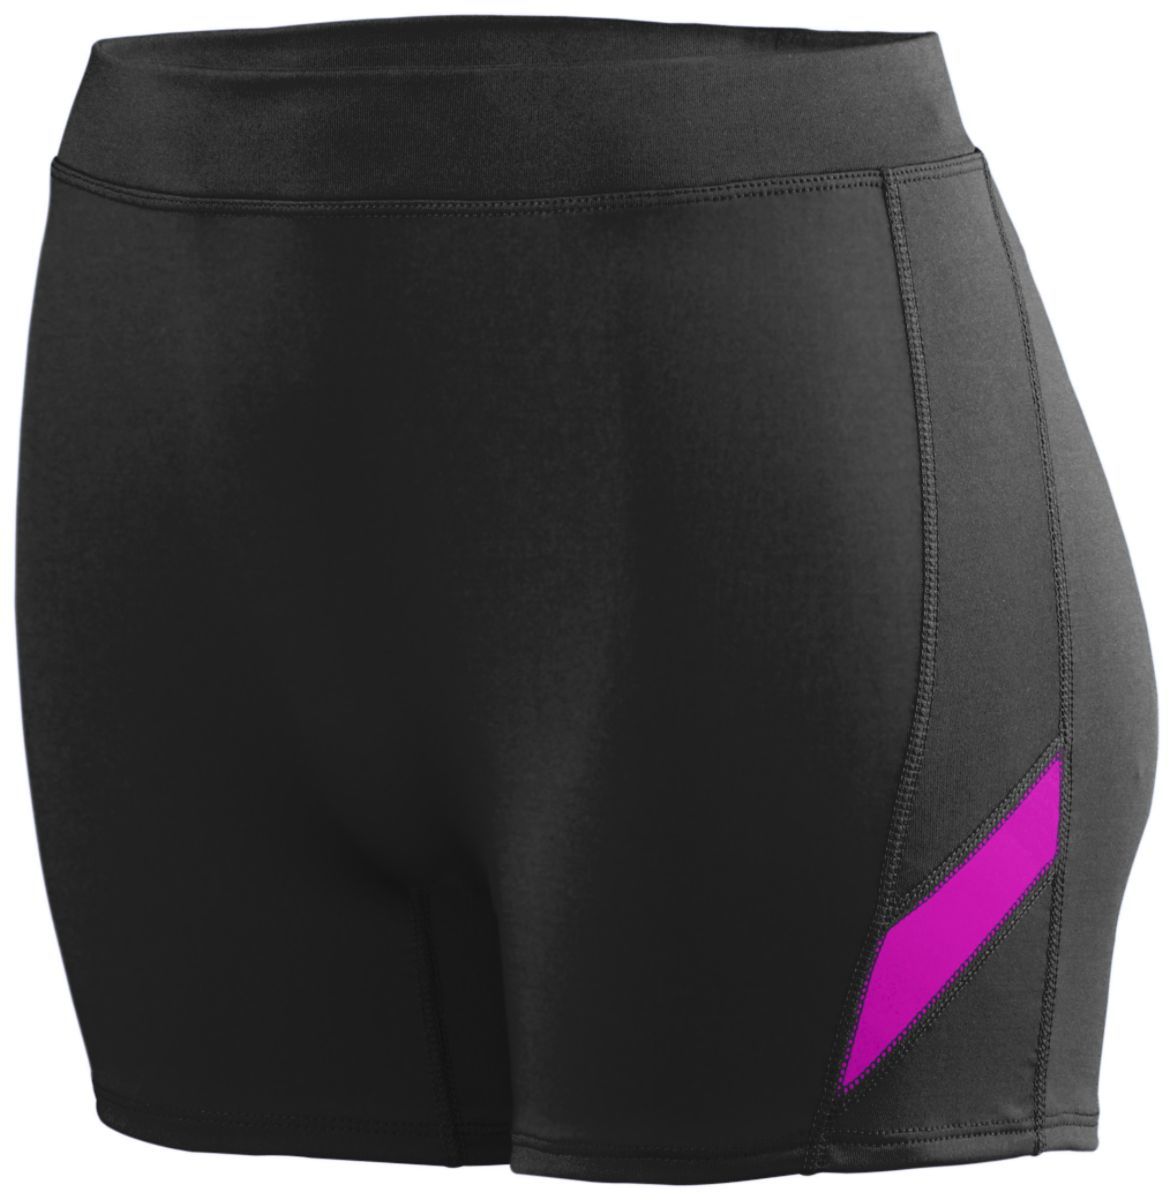 Augusta Sportswear Girls Stride Shorts in Black/Power Pink  -Part of the Girls, Augusta-Products, Volleyball, Girls-Shorts product lines at KanaleyCreations.com